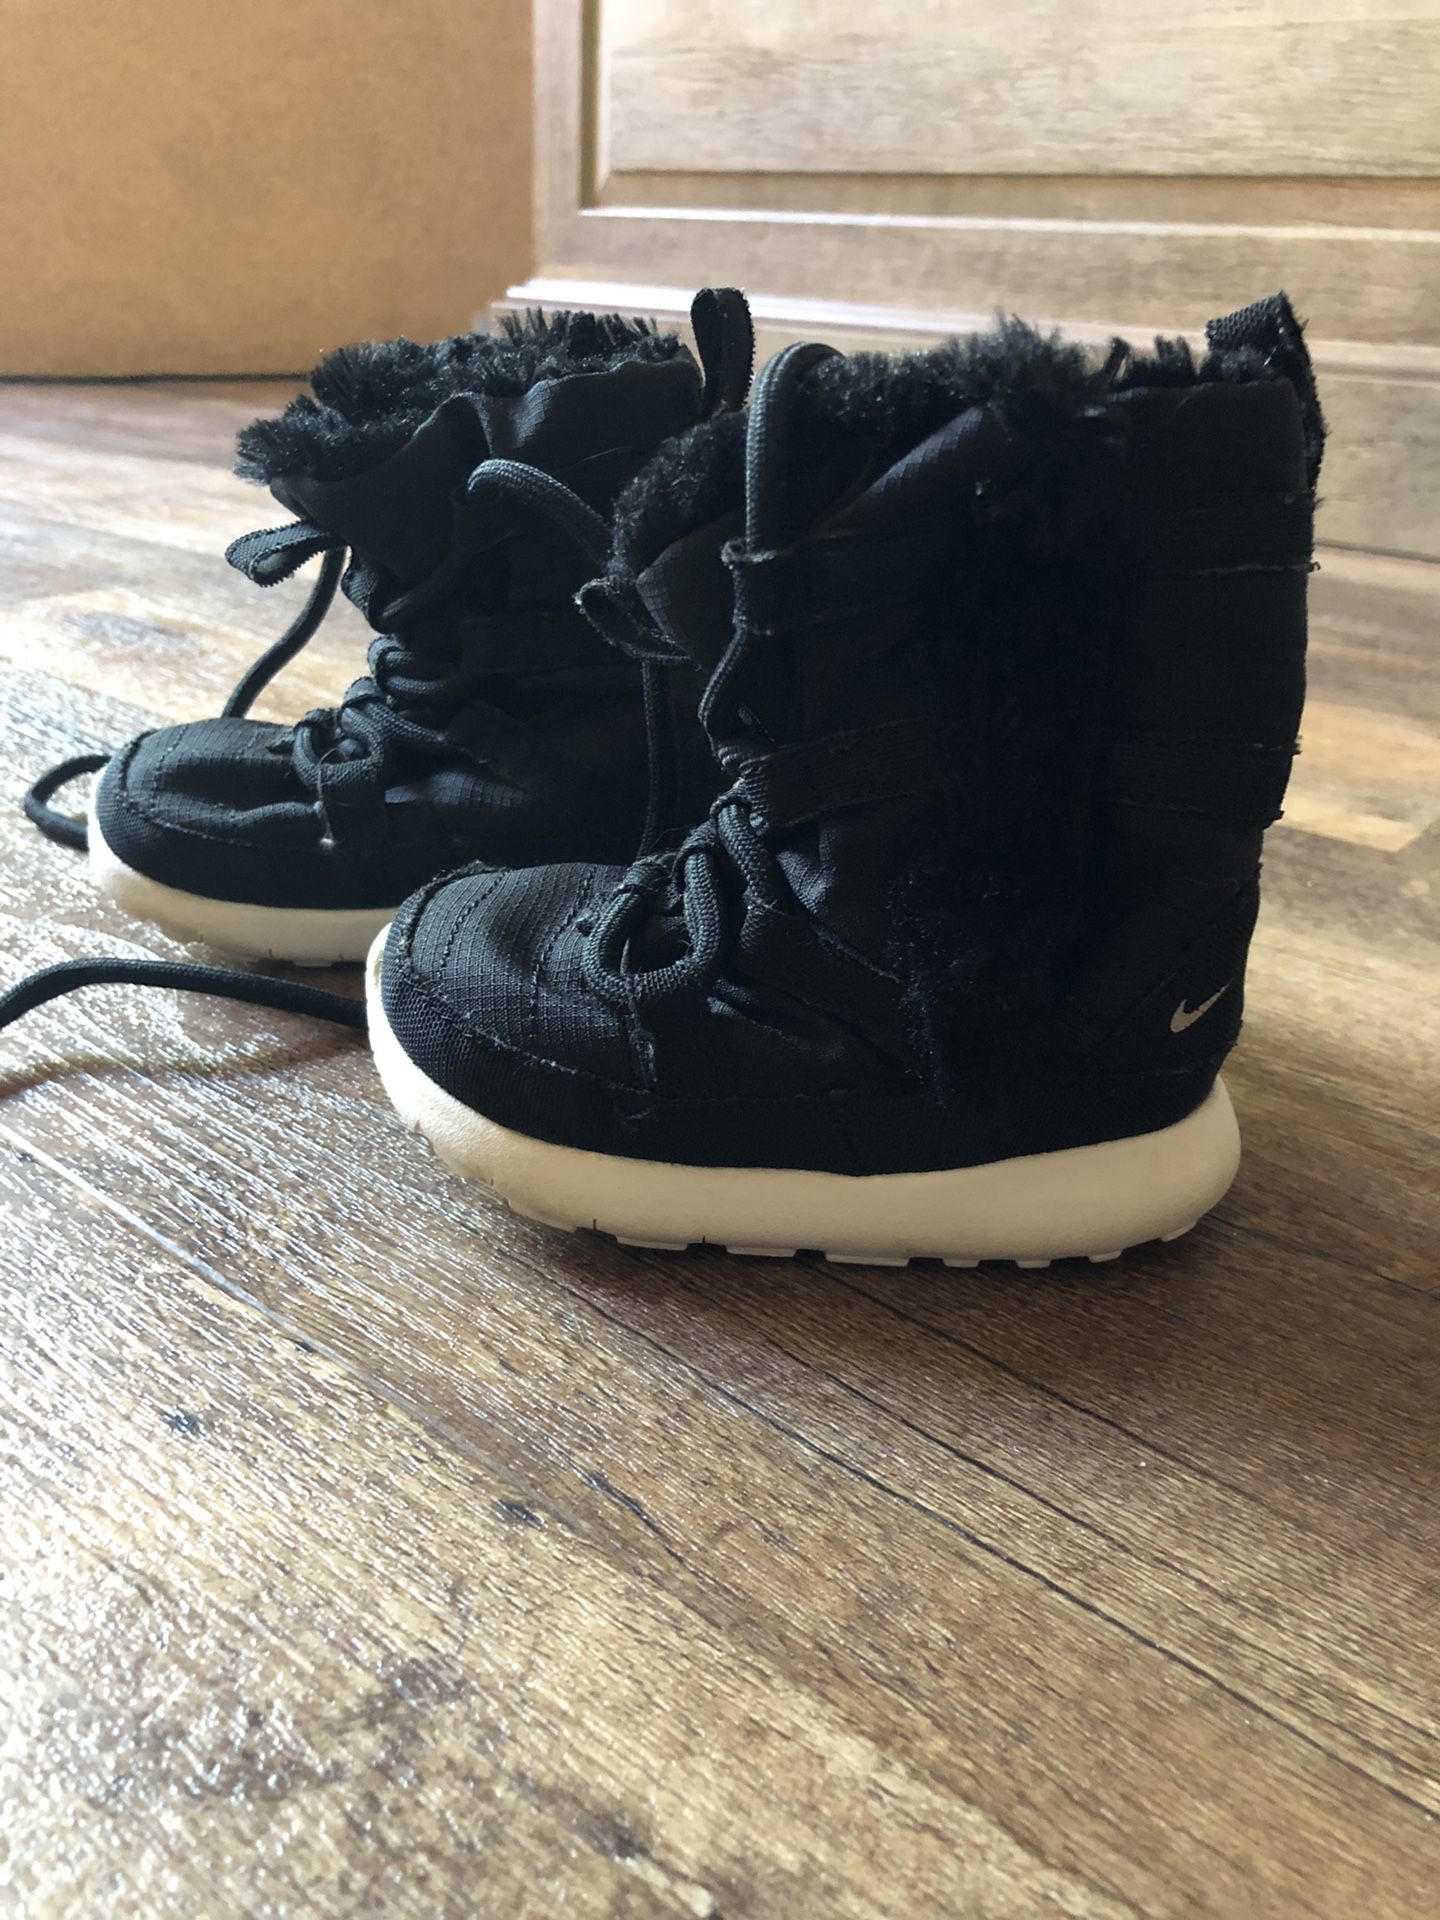 4c Nike toddler snow boots